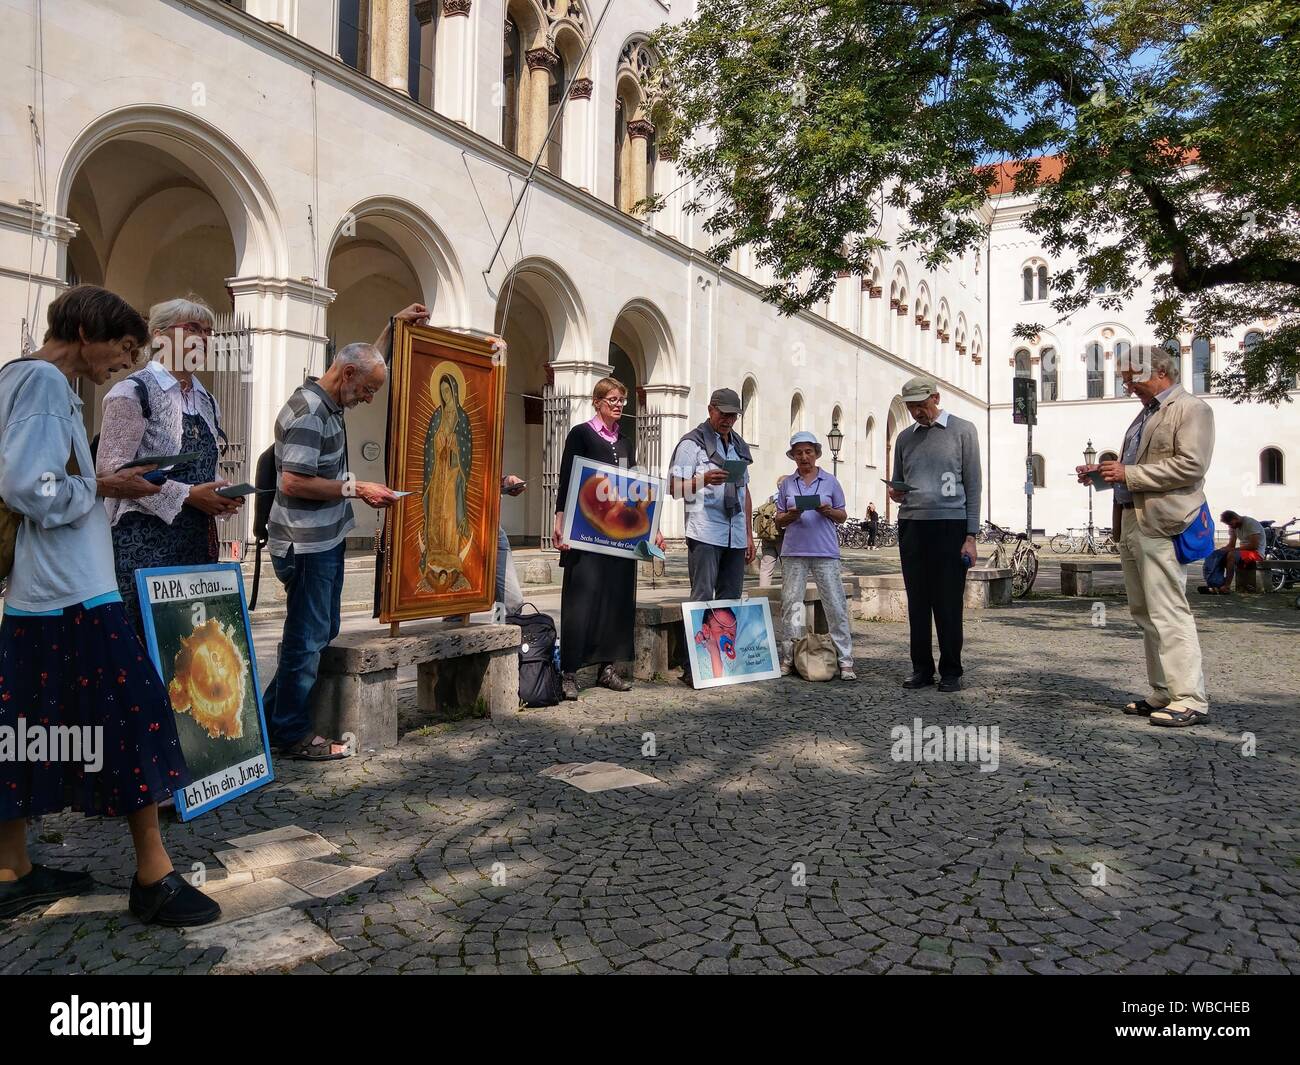 Munich, Bavaria, Germany. 26th Aug, 2019. Headed by well-known anti abortion activist Wolfgang Herring, a small group of Christian anti-abortion activists marched through the city of Munich, protesting against the Pro Familia organization who offers counseling services for pregnant women, ultimately ending at the Ludwig Maximilian University's Geschwister Scholl Platz. Credit: Sachelle Babbar/ZUMA Wire/Alamy Live News Stock Photo